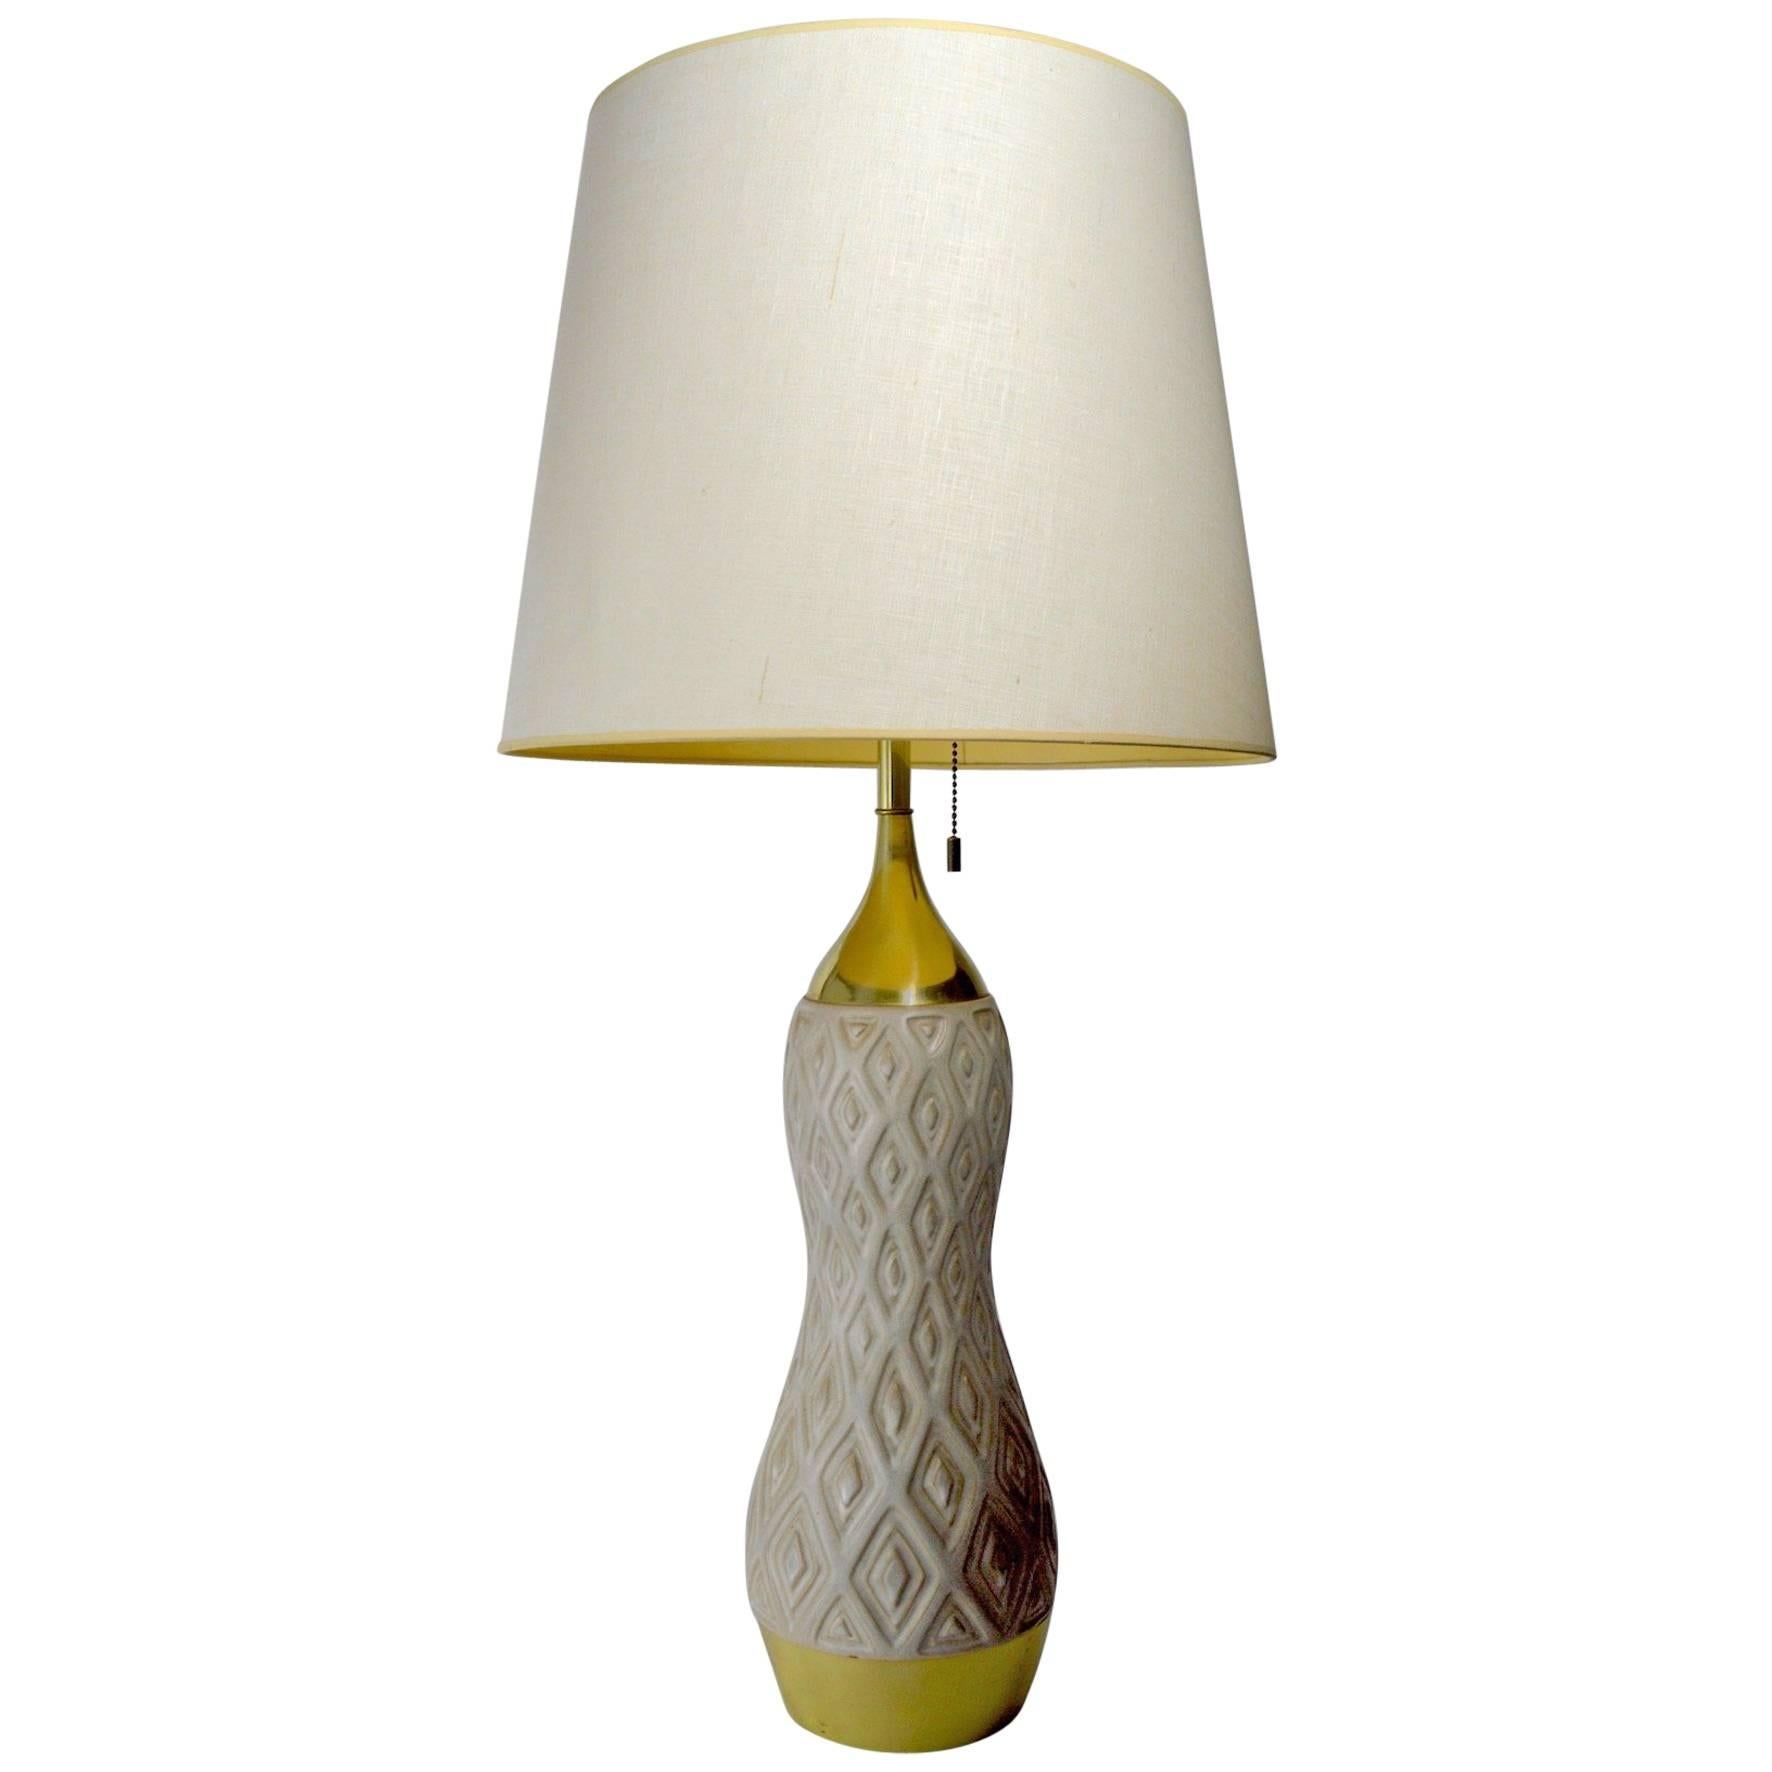 Gerald Thurston for Lightolier Ceramic and Brass Table Lamp For Sale